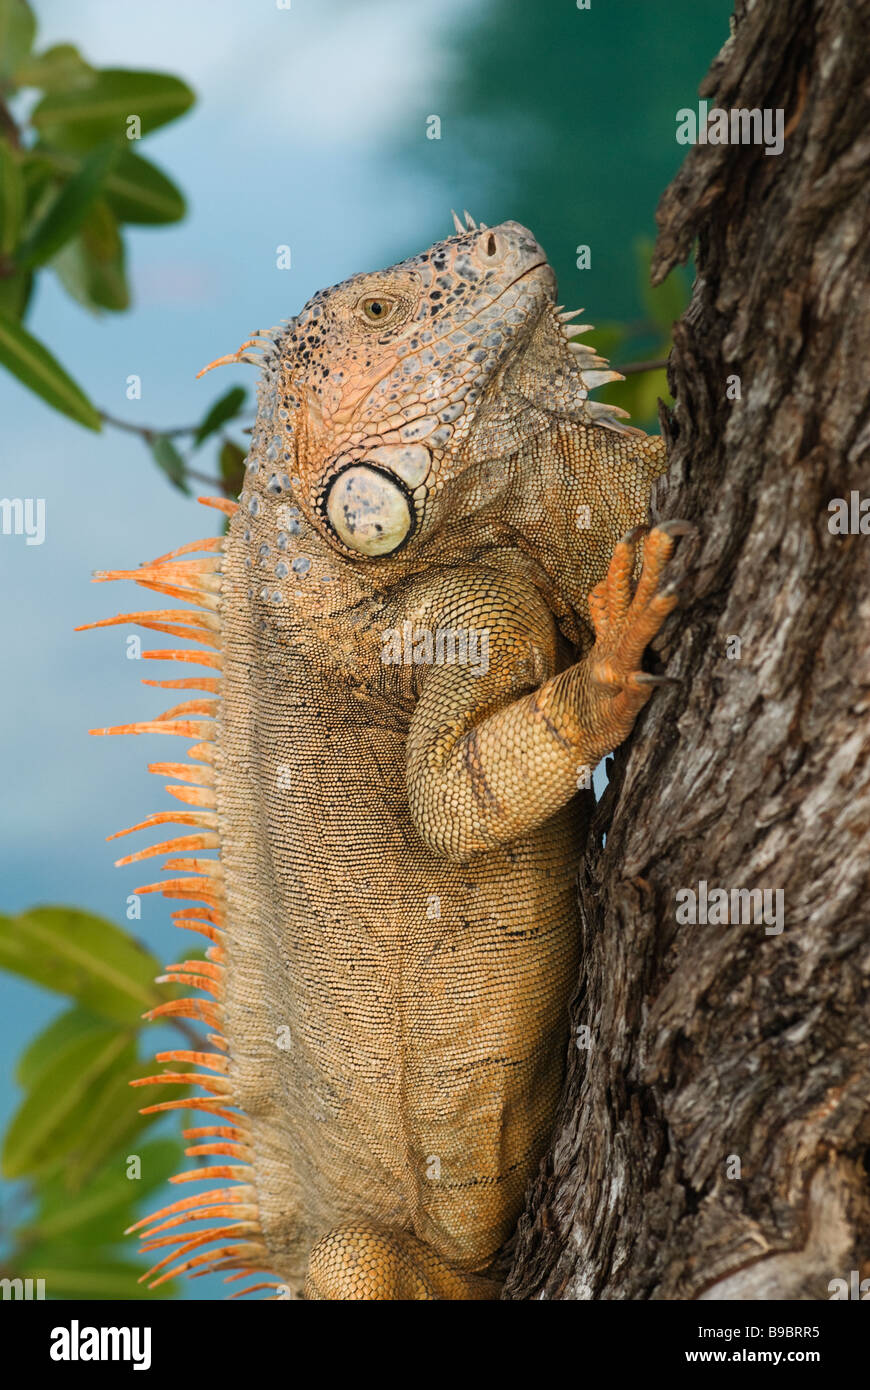 Green iguana Iguana iguana a large arboreal herbivorous species of lizard native to Central and South America Stock Photo